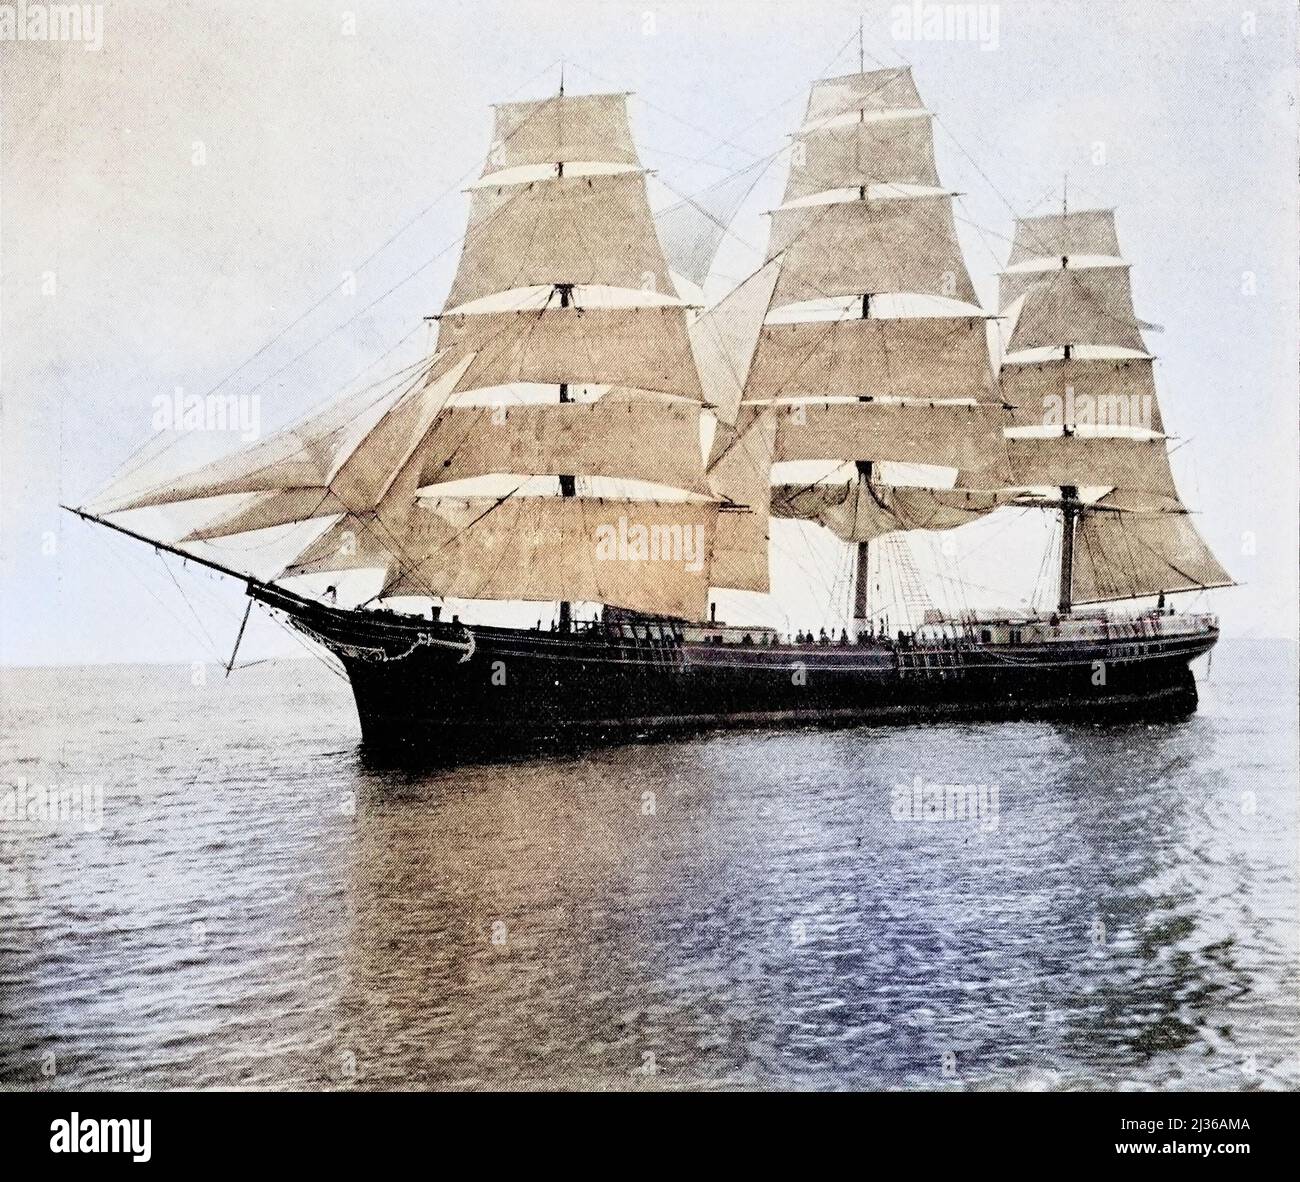 The Granite State A typical American Wooden Sailing Ship from the book ' Steam vessels & marine engines ' by G. Foster Howell, Publisher New York : American Shipbuilder 1896 Stock Photo